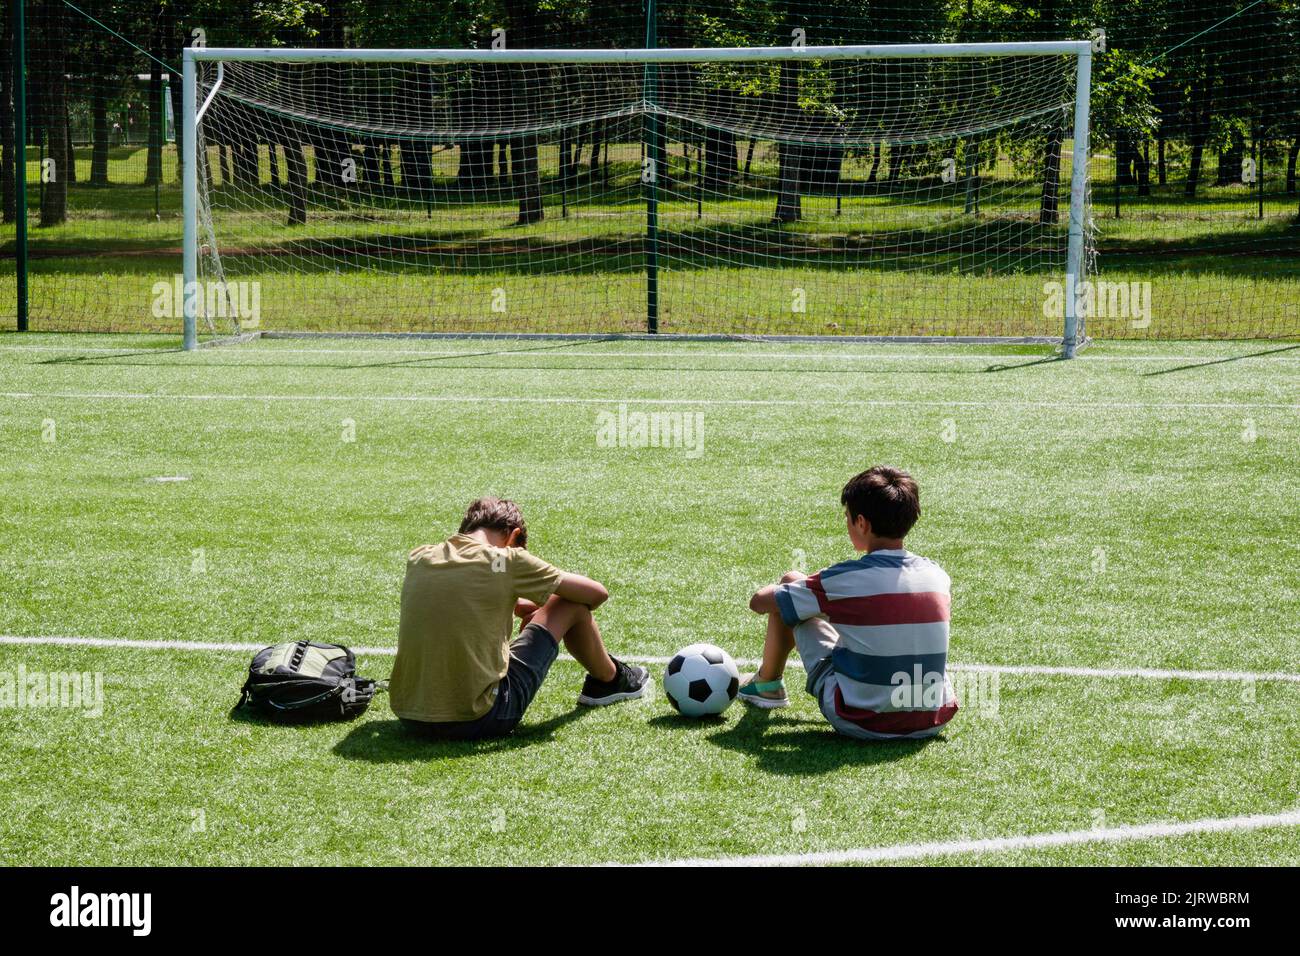 Teenagers talking in school stadium outdoors. Teenage boy comforting consoling upset sad friend. Education, bullying, conflict, problems at school Stock Photo